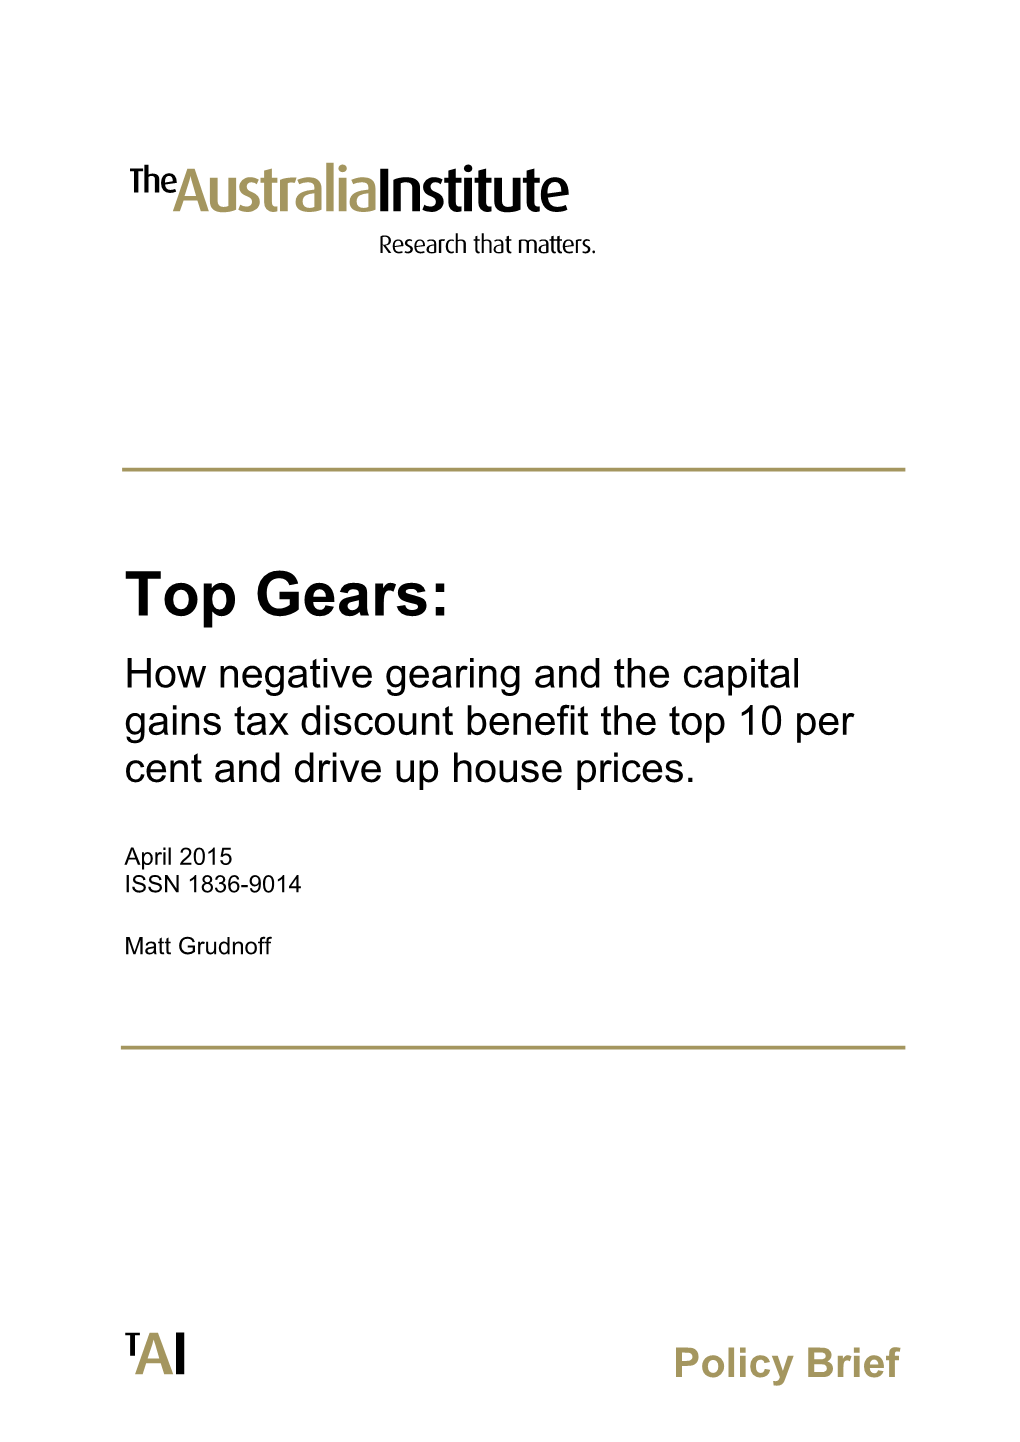 Negative Gearing and the Capital Gains Discount